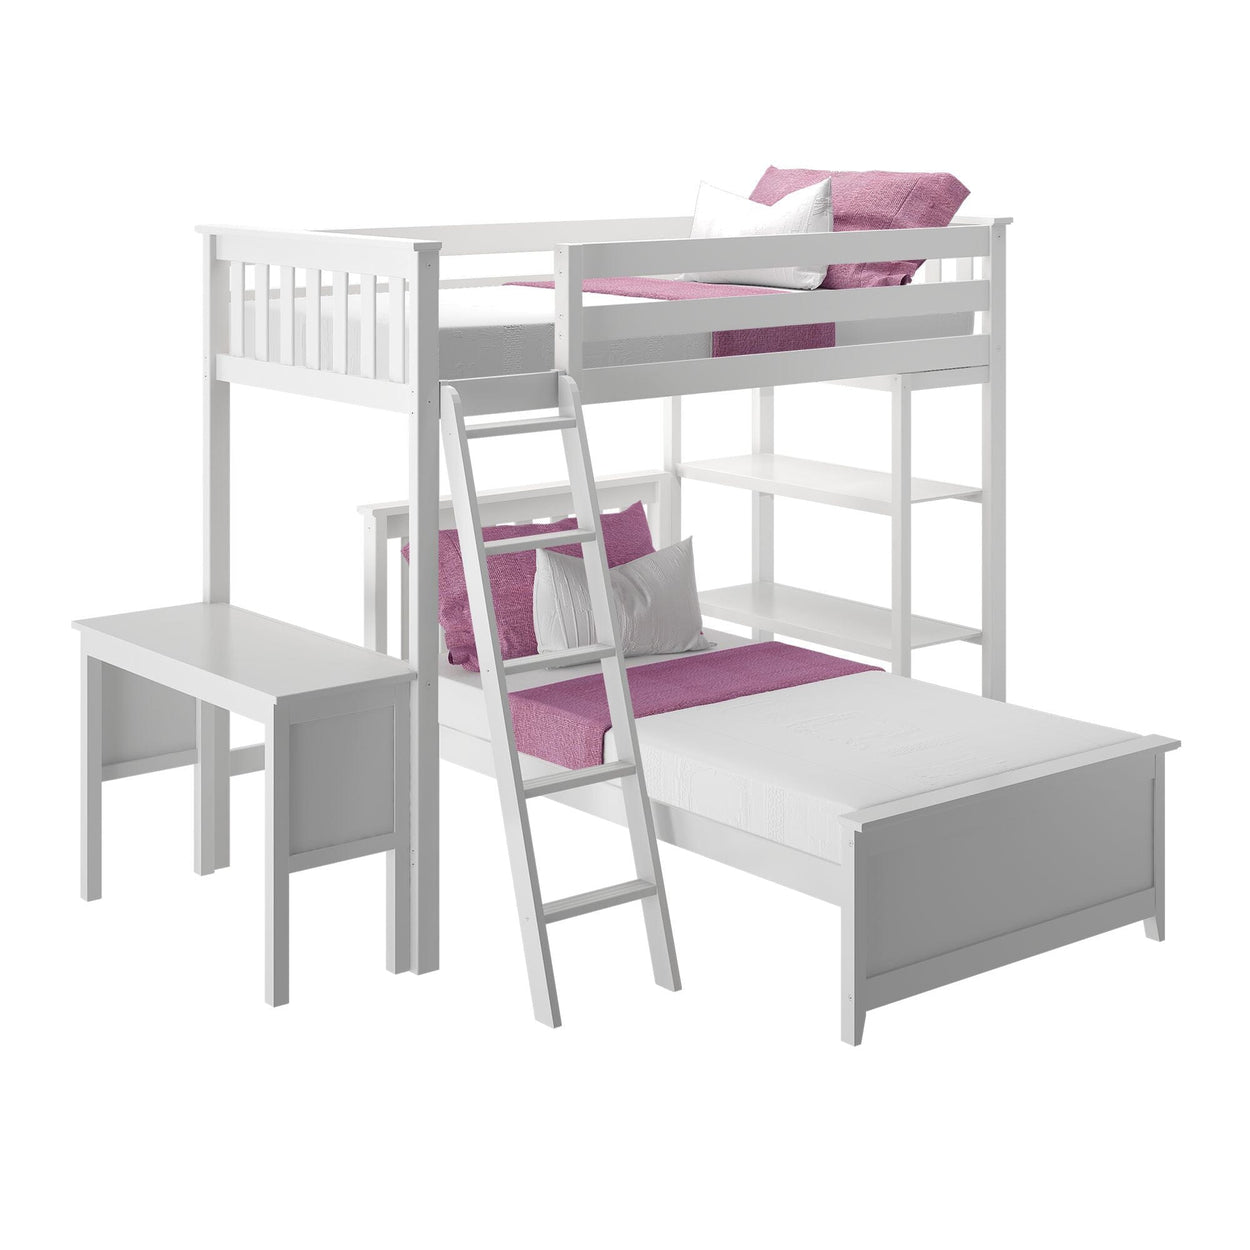 18-901-002 : Bunk Beds L-Shaped Twin over Twin Bunk Bed with Bookcase and Desk, White